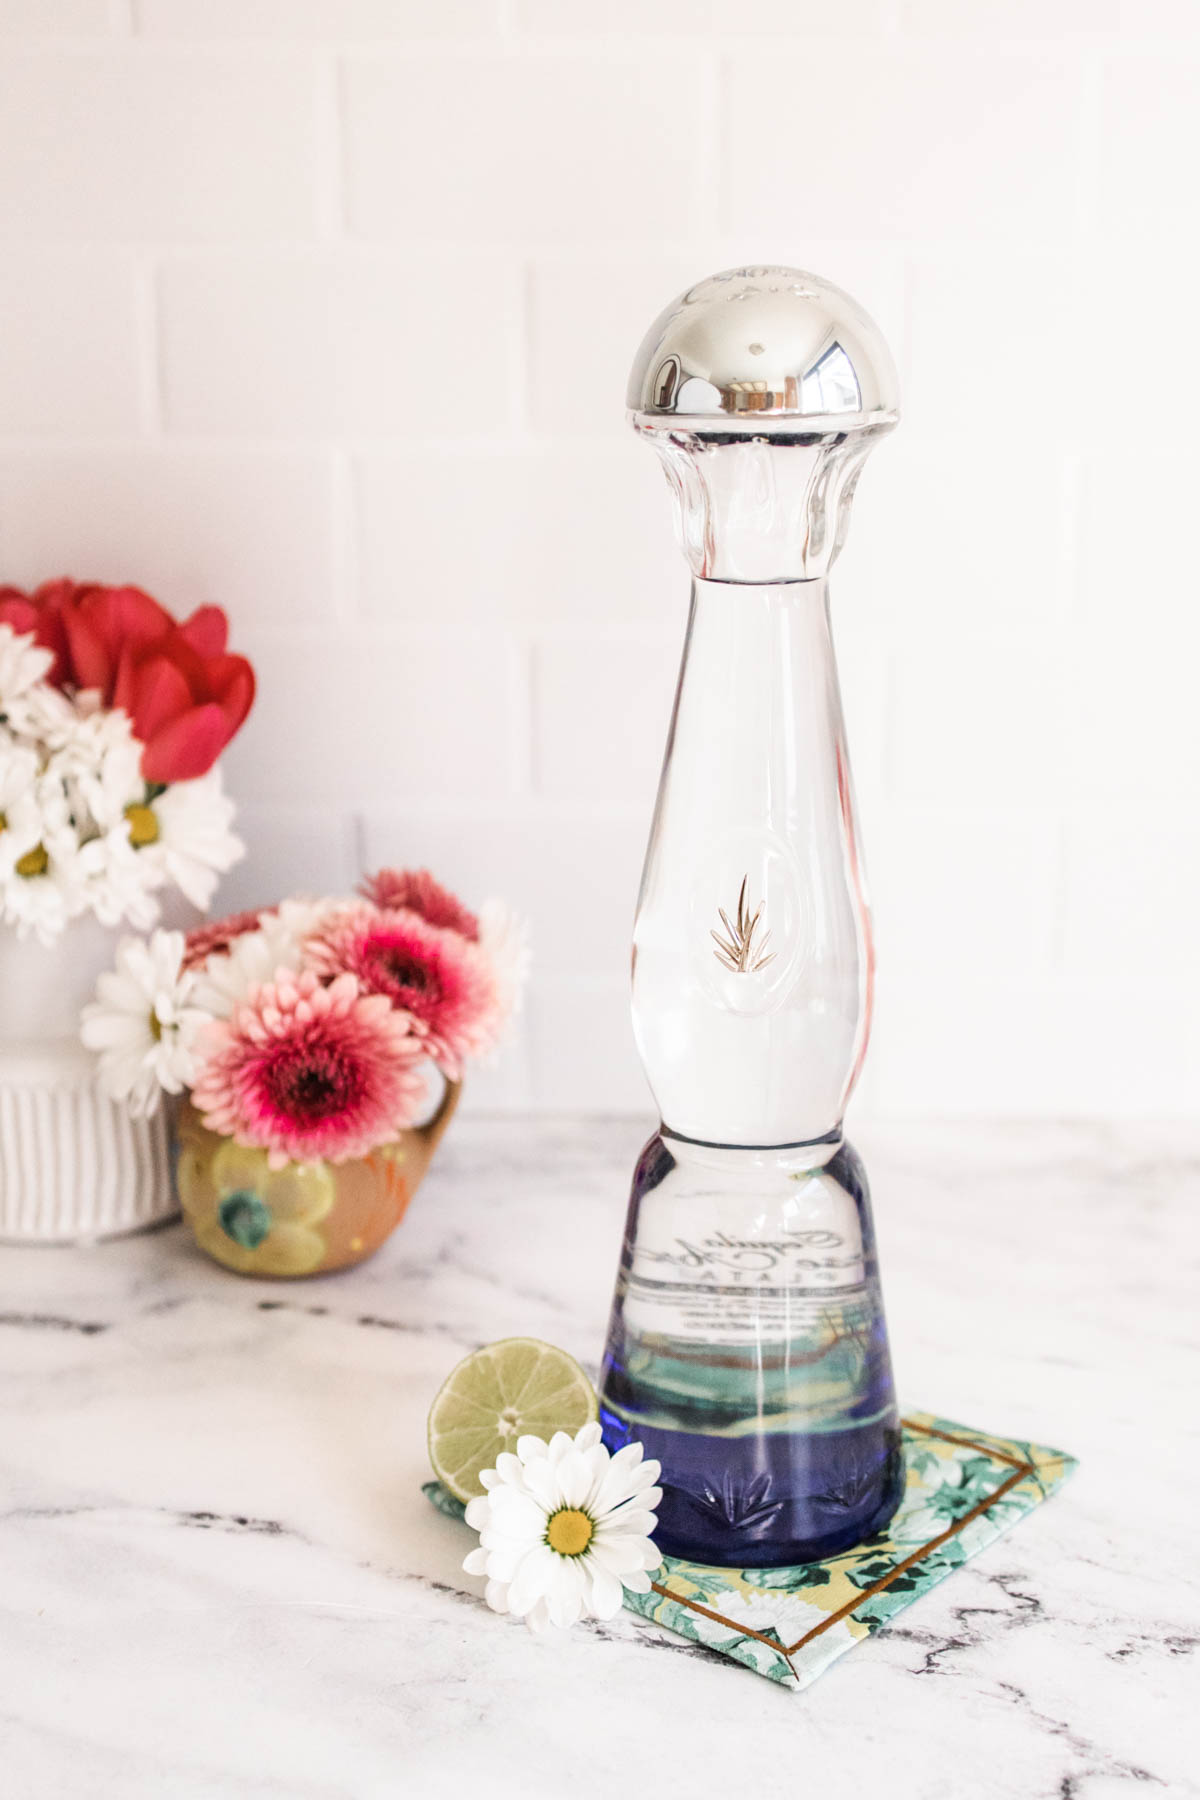 A beautiful bottle of Clase Azul Tequila Plata with decorative flowers in the background.